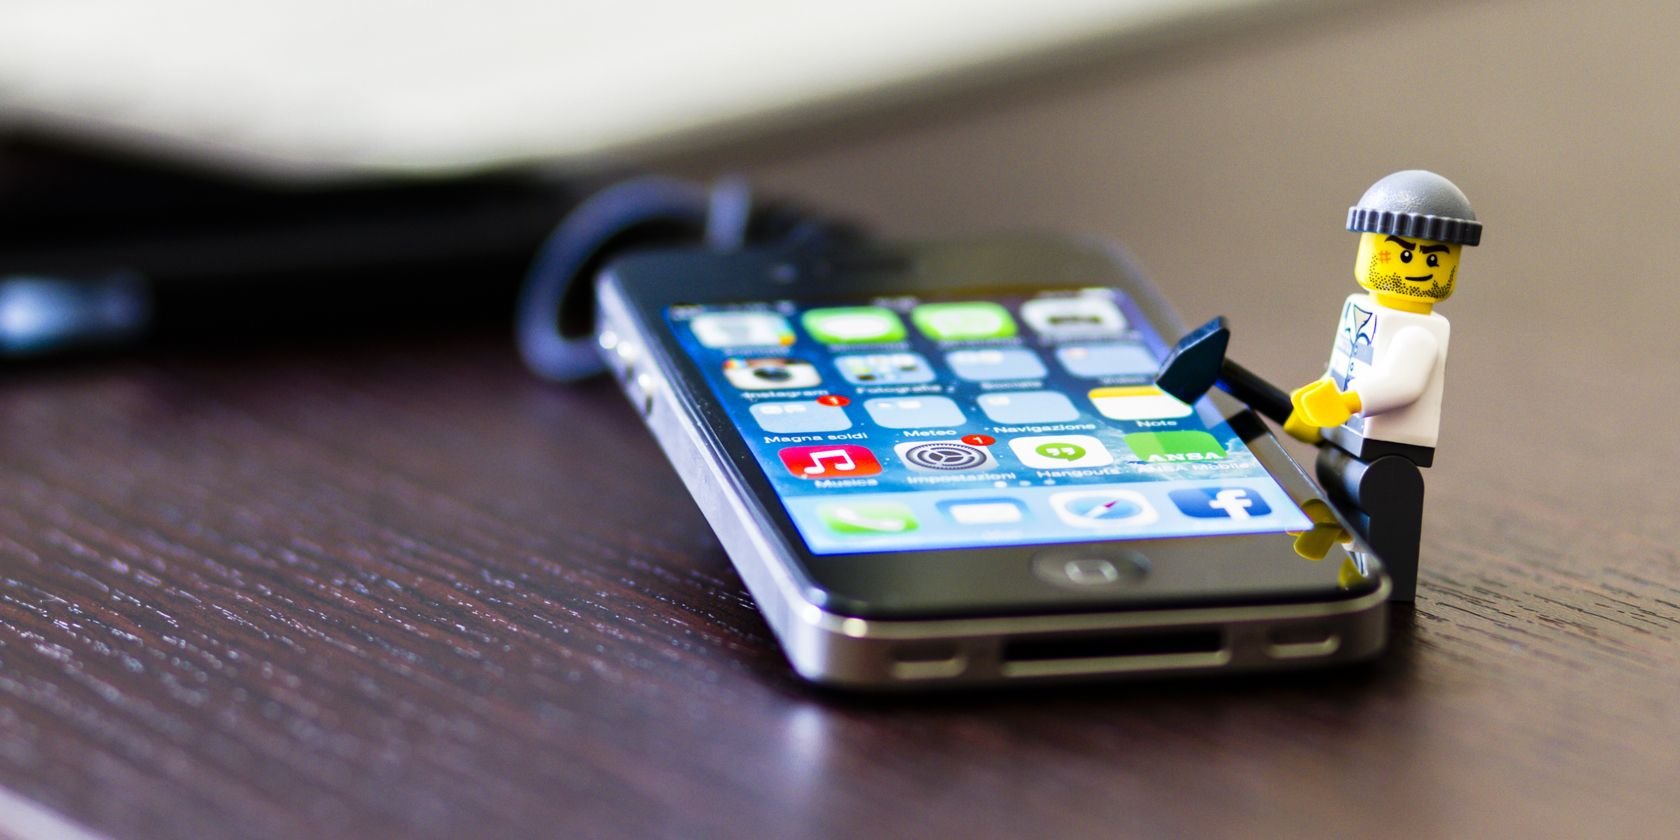 Does Your iPhone Need Third-Party Security Apps?